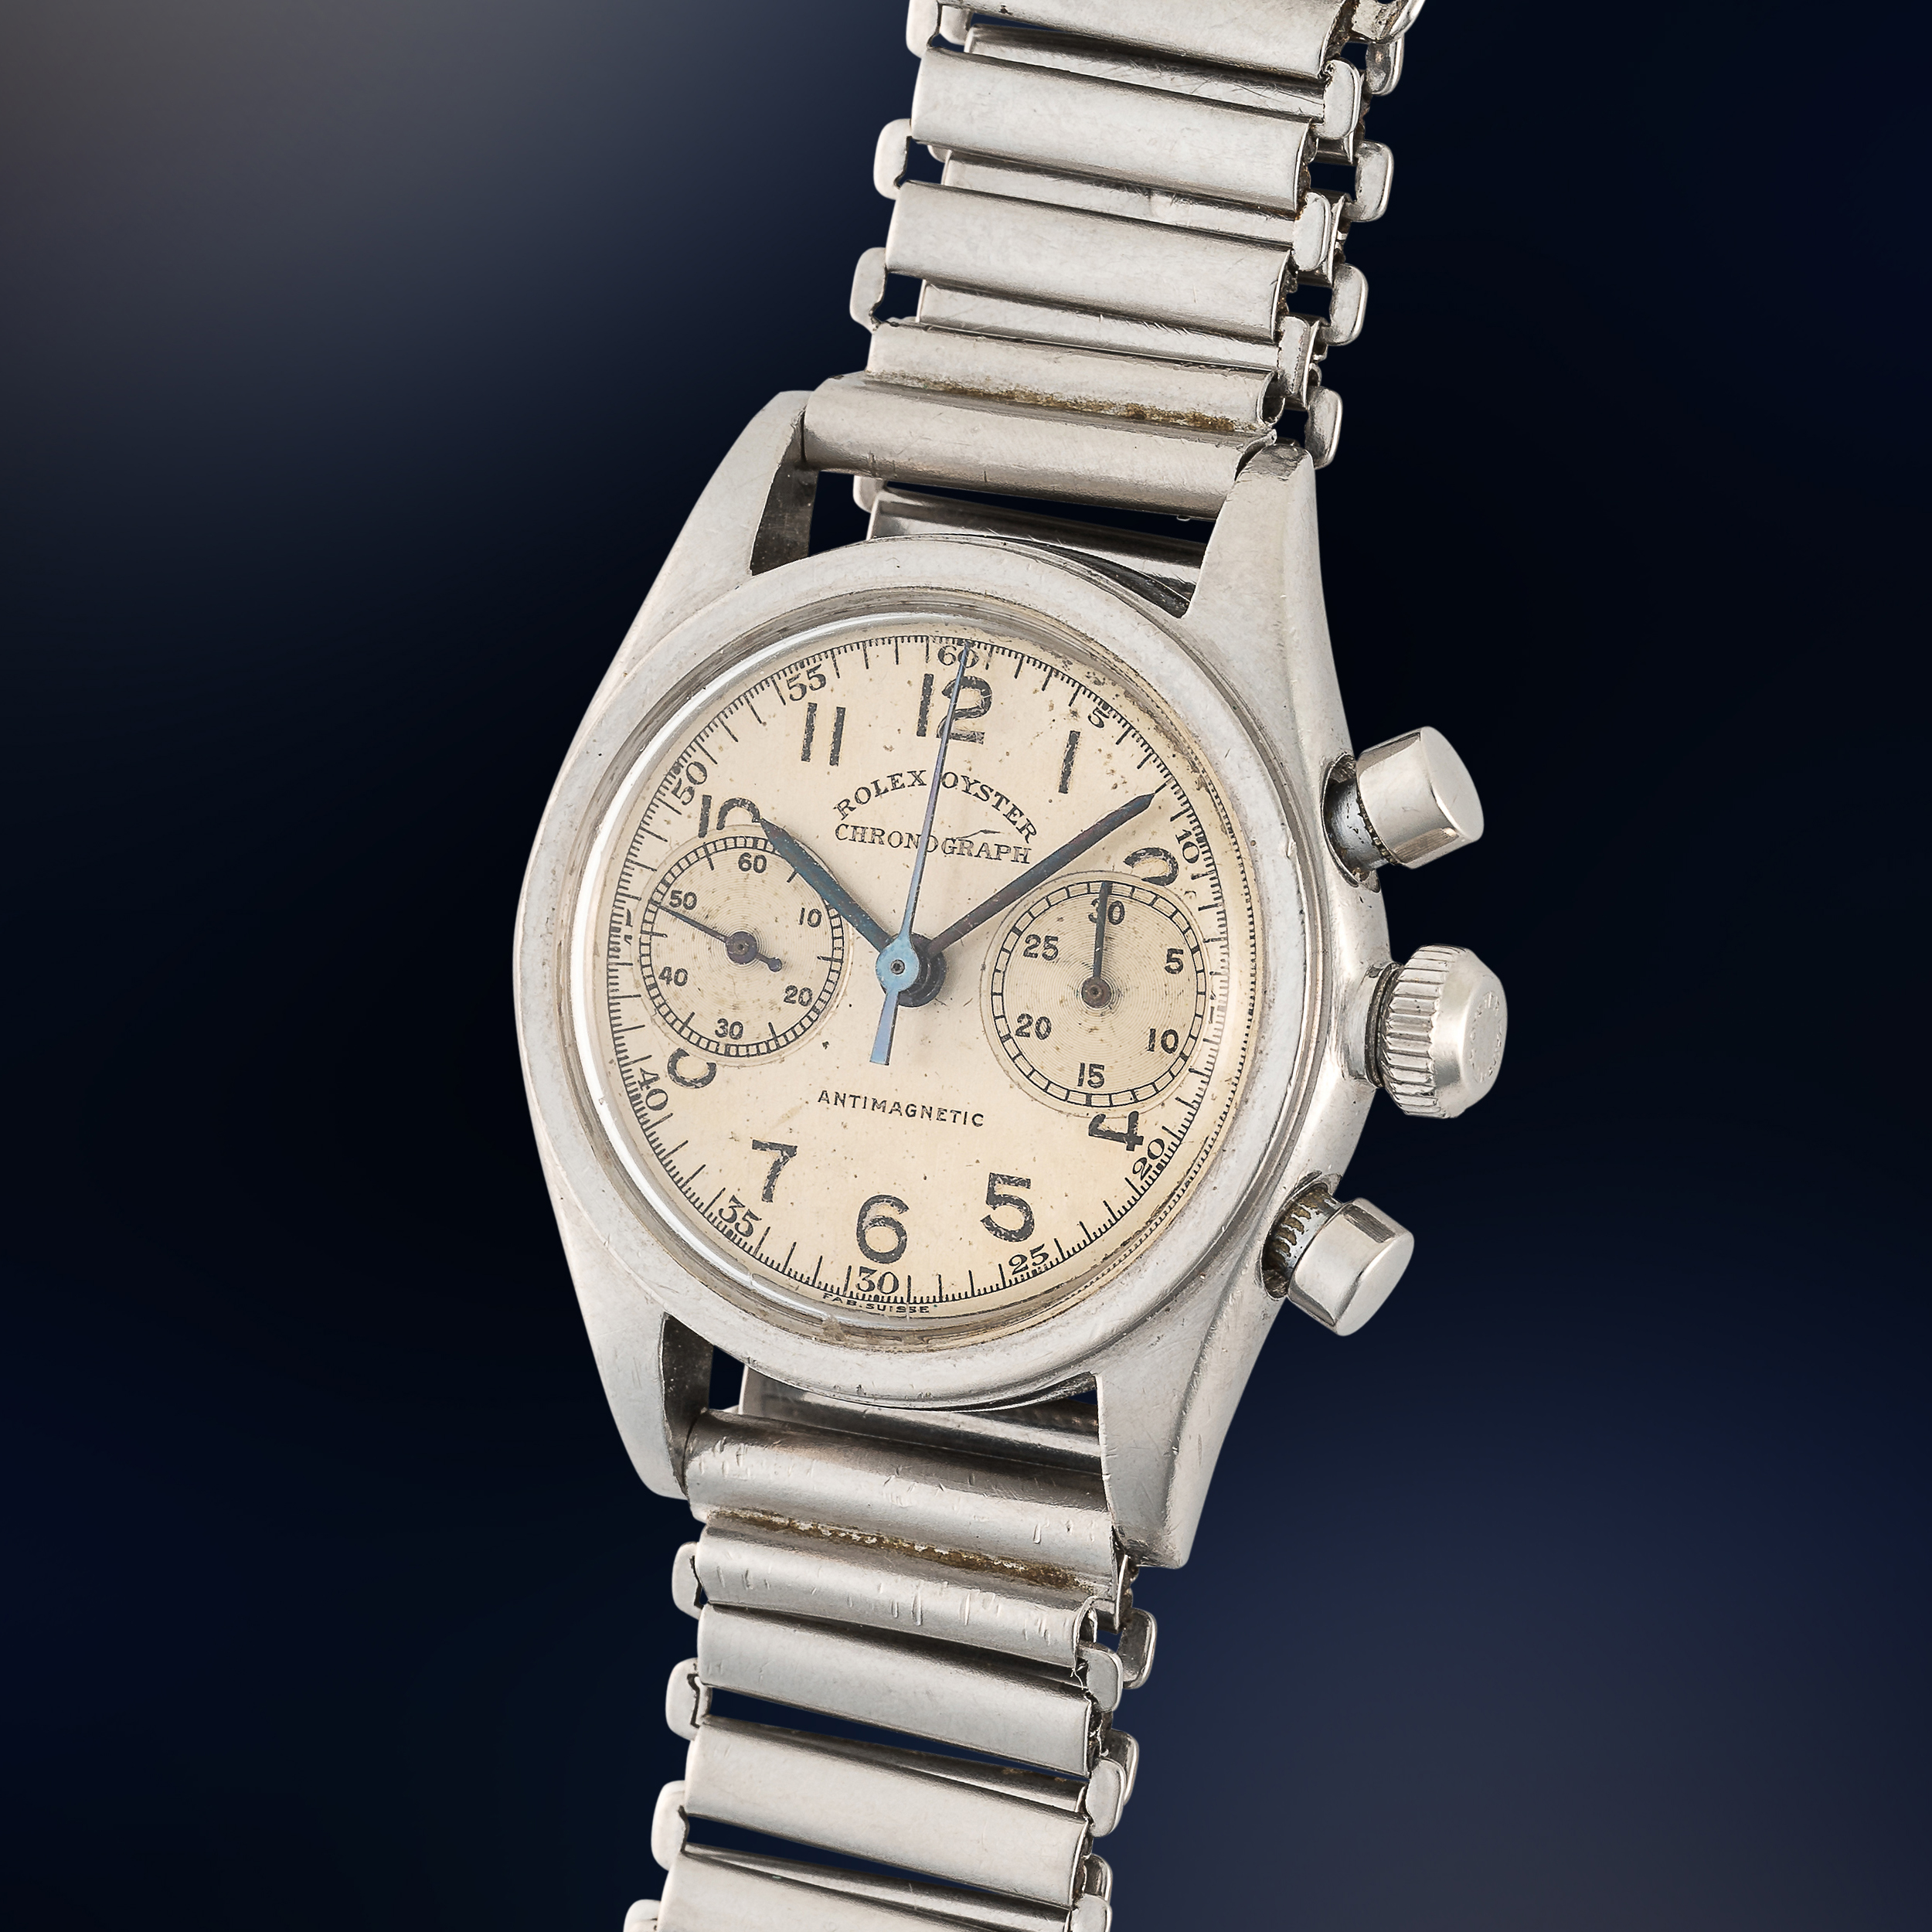 A VERY RARE GENTLEMAN'S SMALL SIZE STAINLESS STEEL ROLEX OYSTER CHRONOGRAPH WRIST WATCH CIRCA 1940s,